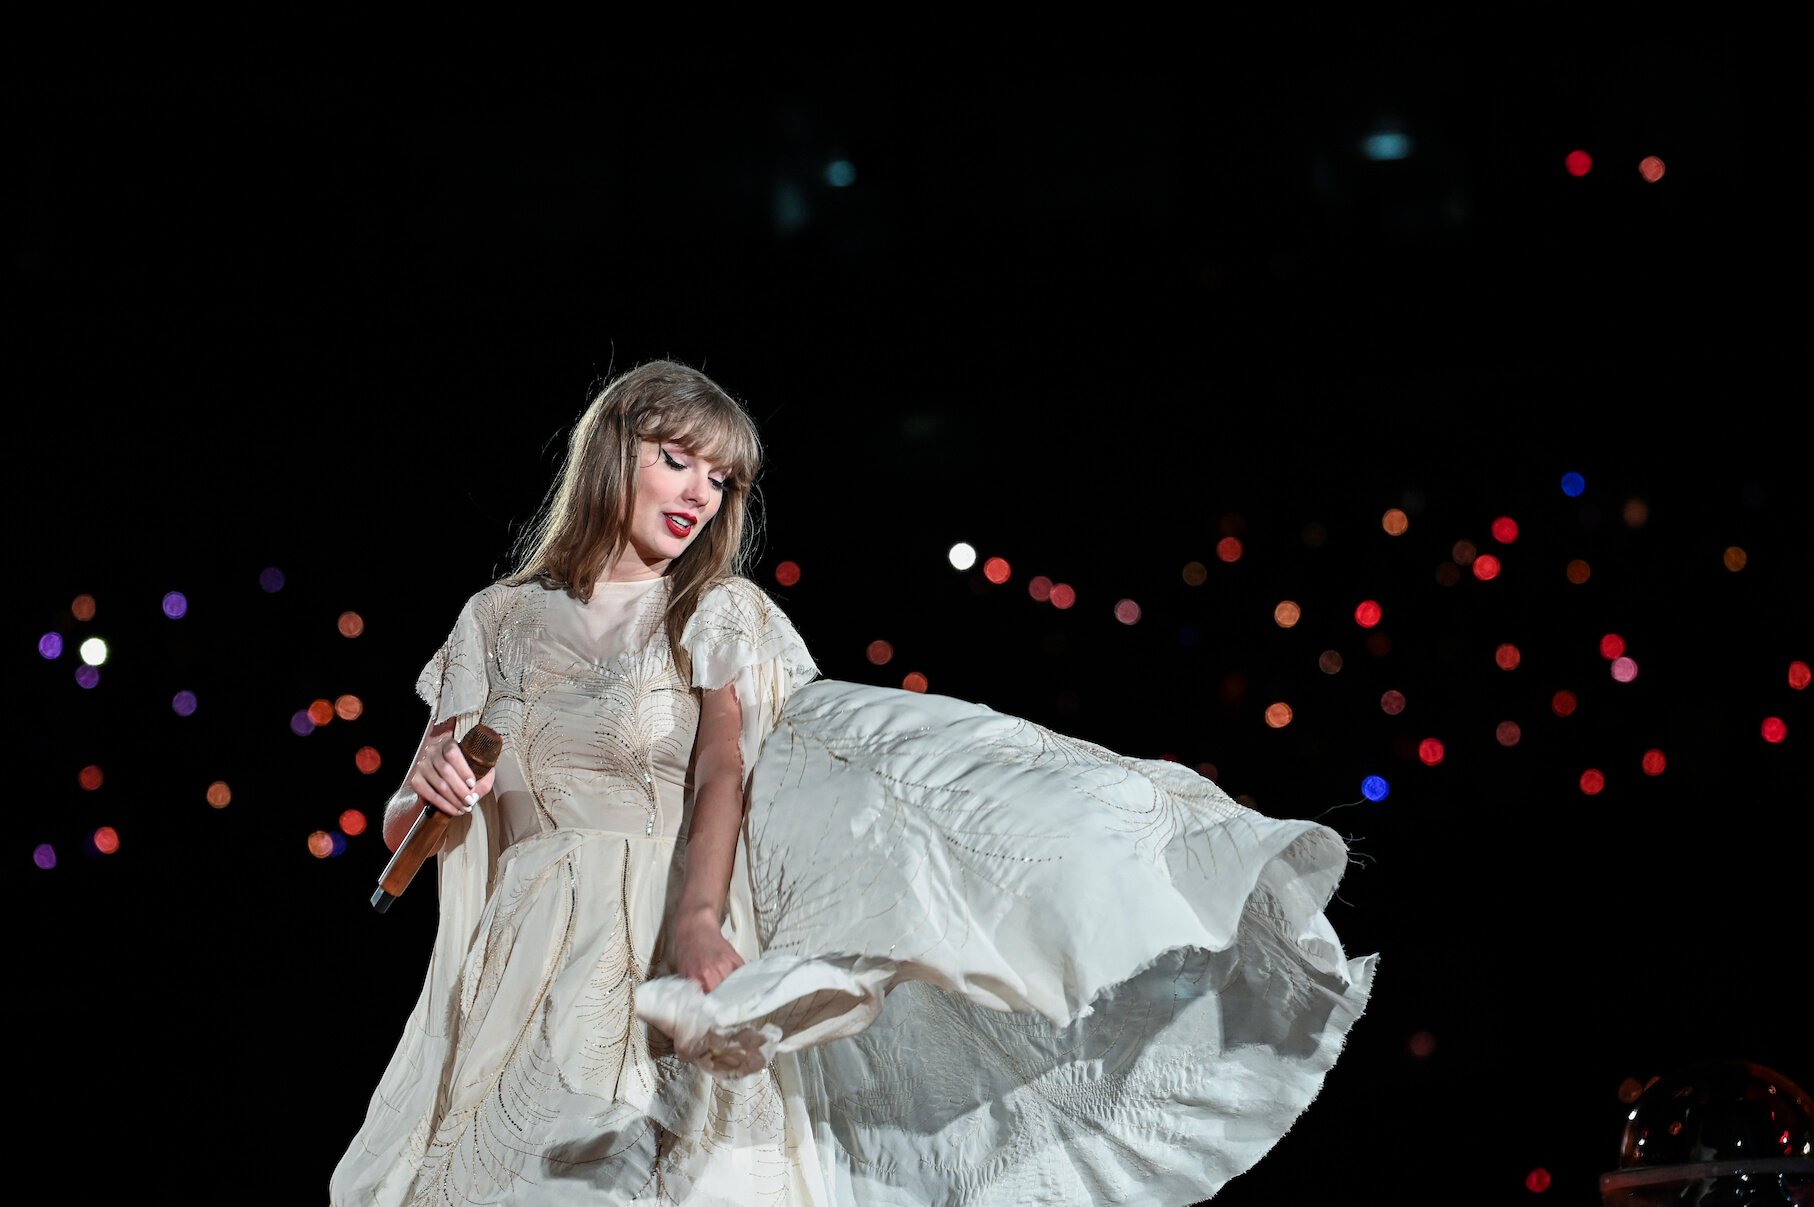 Taylor Swift on stage in Lisbon, Portugal, for 'The Eras Tour' while wearing a flowing white dress and holding a microphone